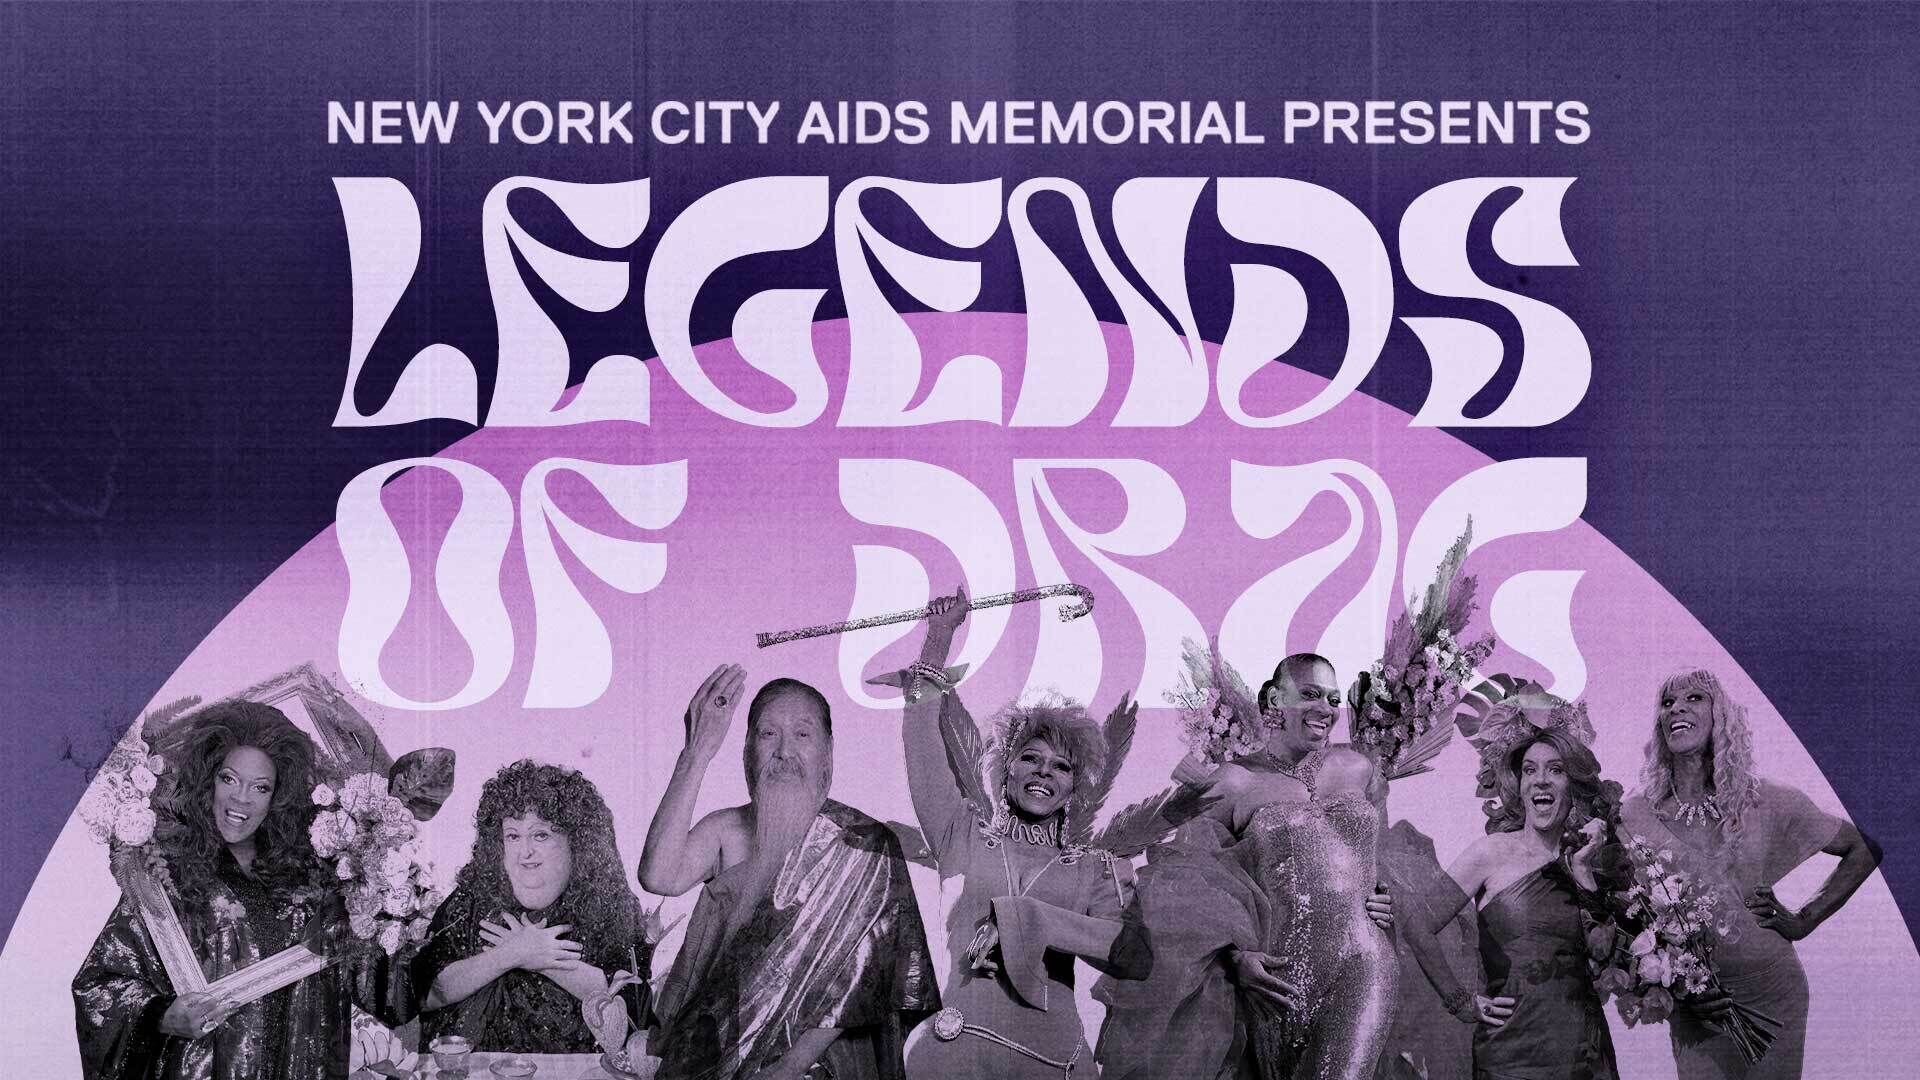 Promotional graphic for NYC AIDS Memorial with "LEGENDS" text overlaying images of performers in vibrant costumes.